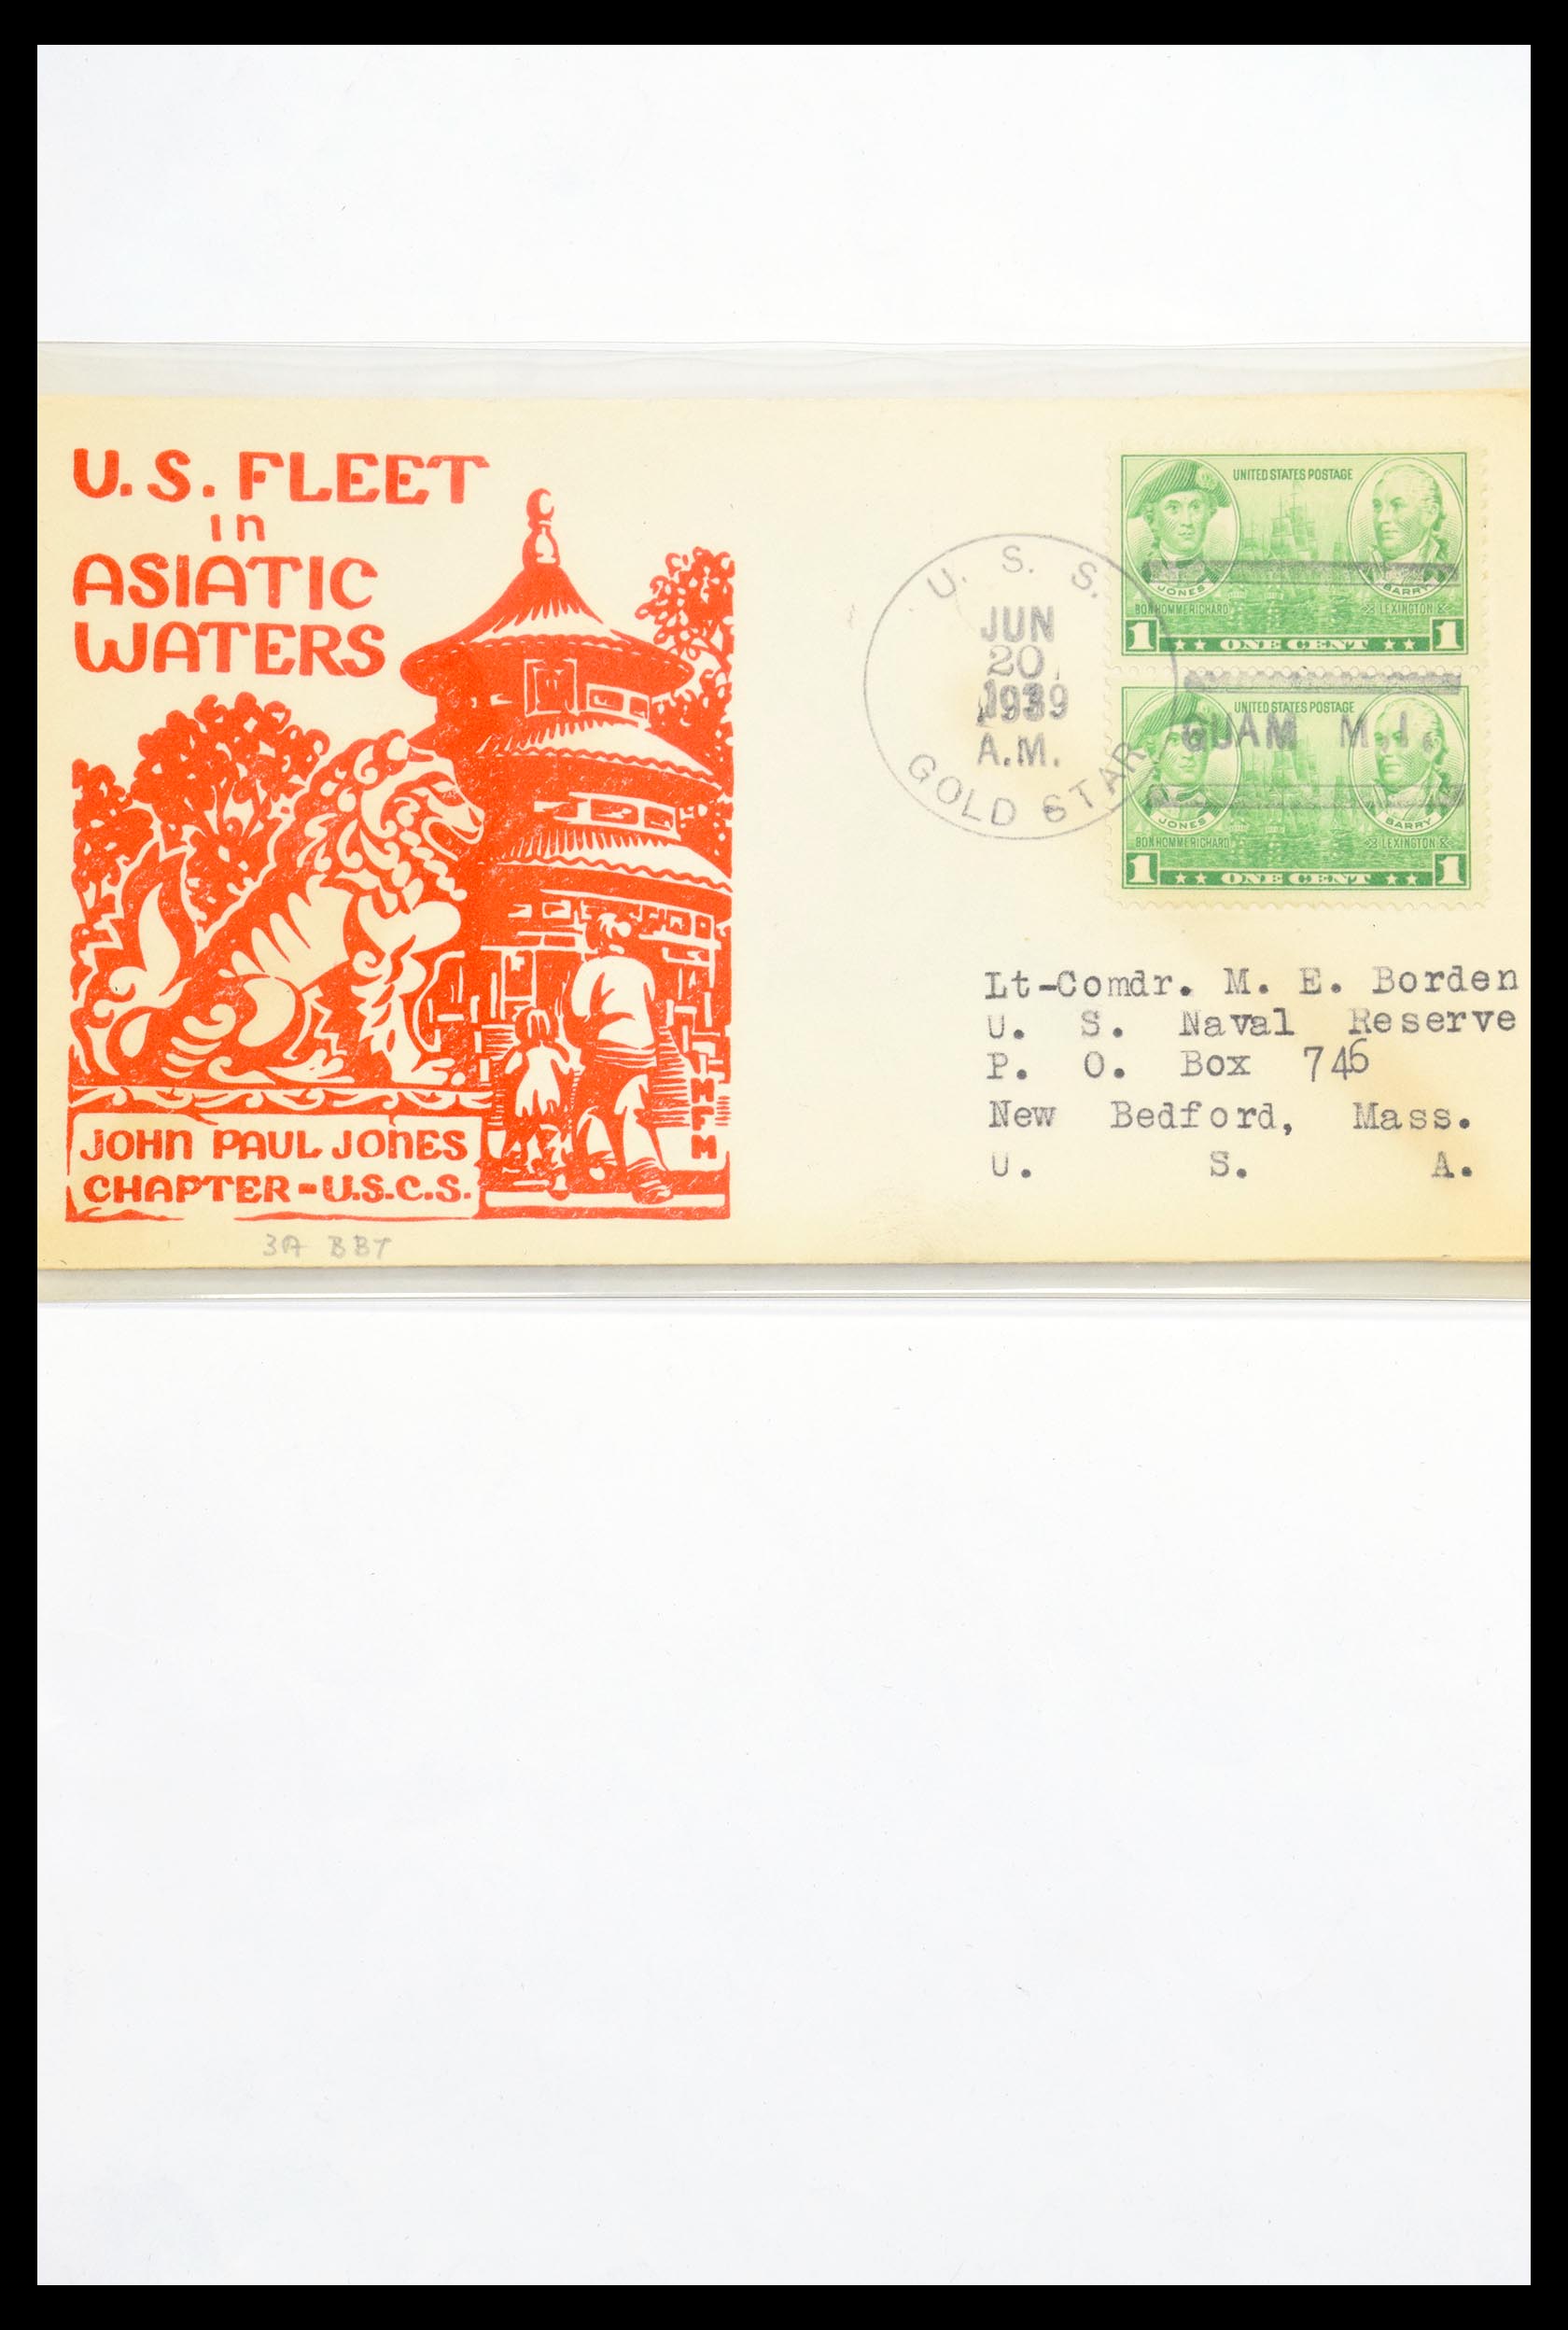 30341 300 - 30341 USA naval cover collection 1930-1970.